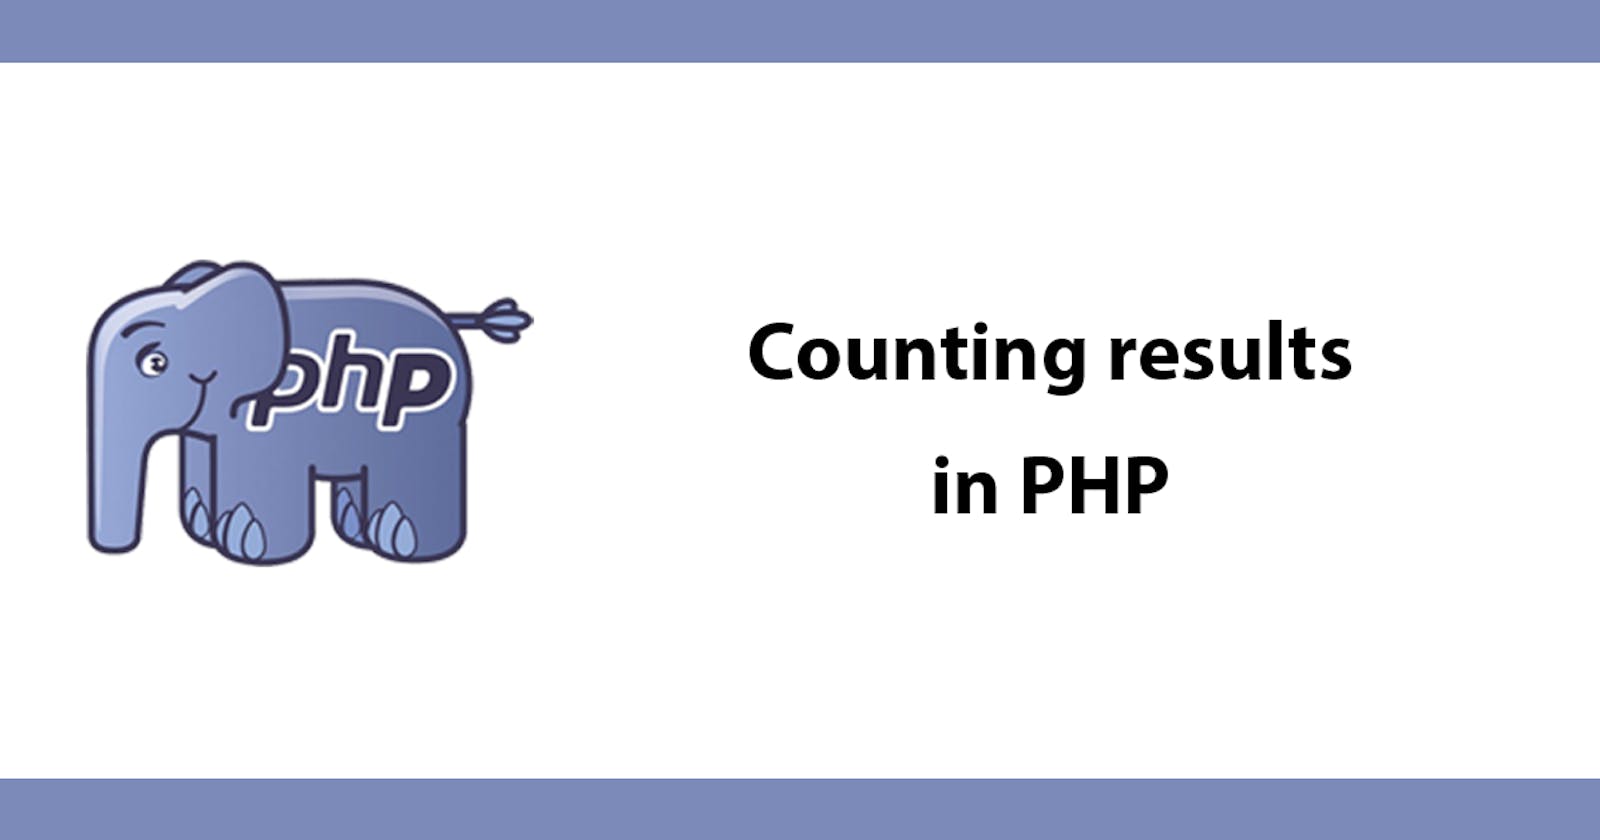 Counting results in PHP